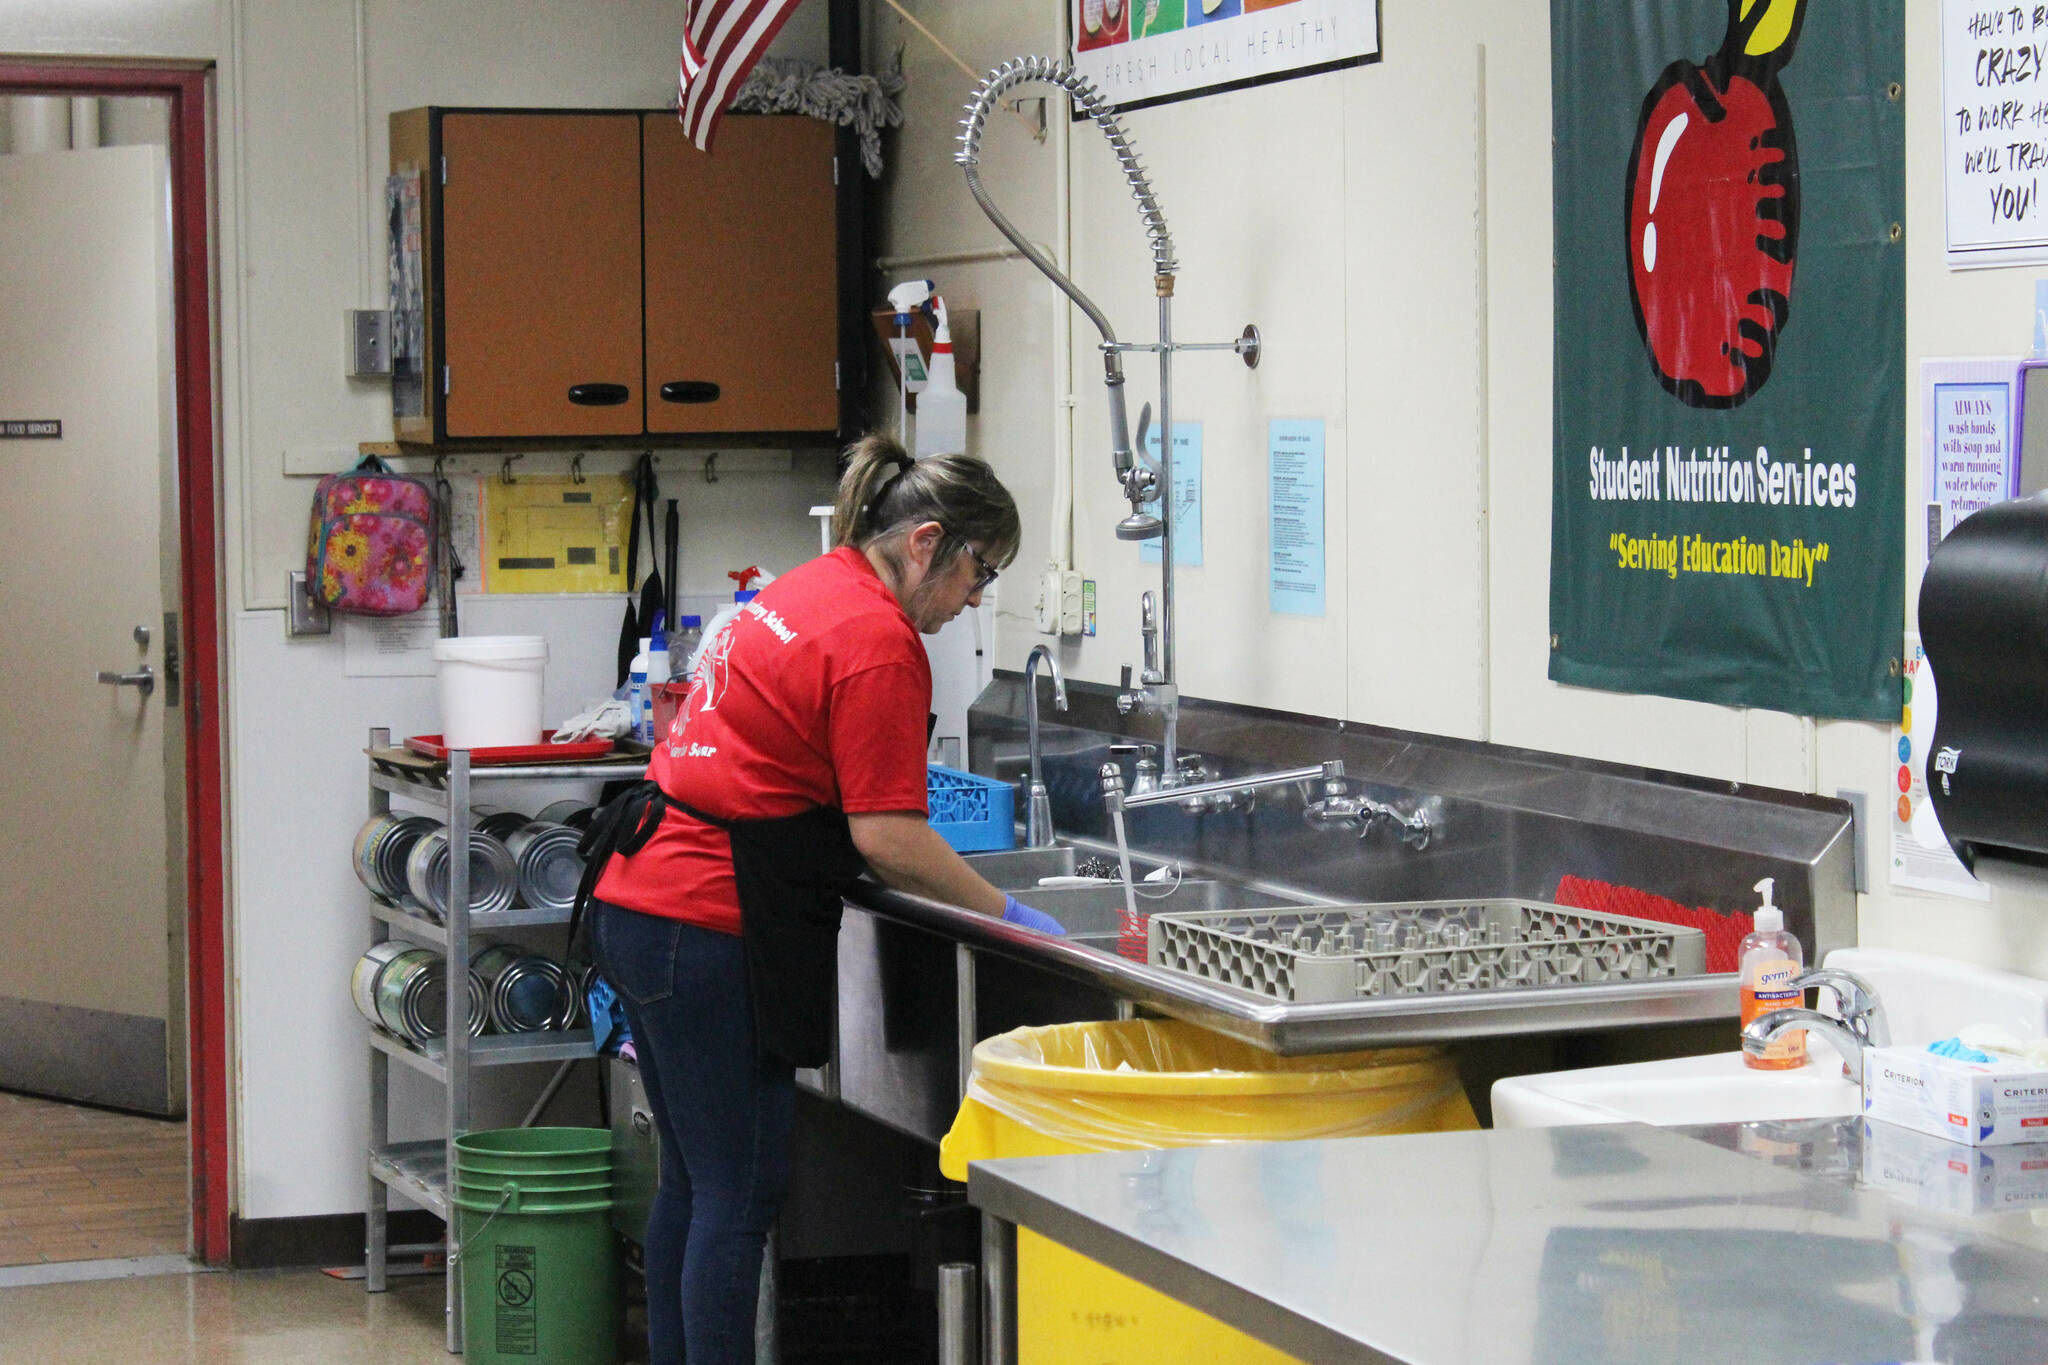 Toni Buchanan washes dishes during lunch time in the cafeteria at Sterling Elementary School on Thursday, Nov. 10, 2022, in Sterling, Alaska. (Ashlyn O’Hara/Peninsula Clarion)